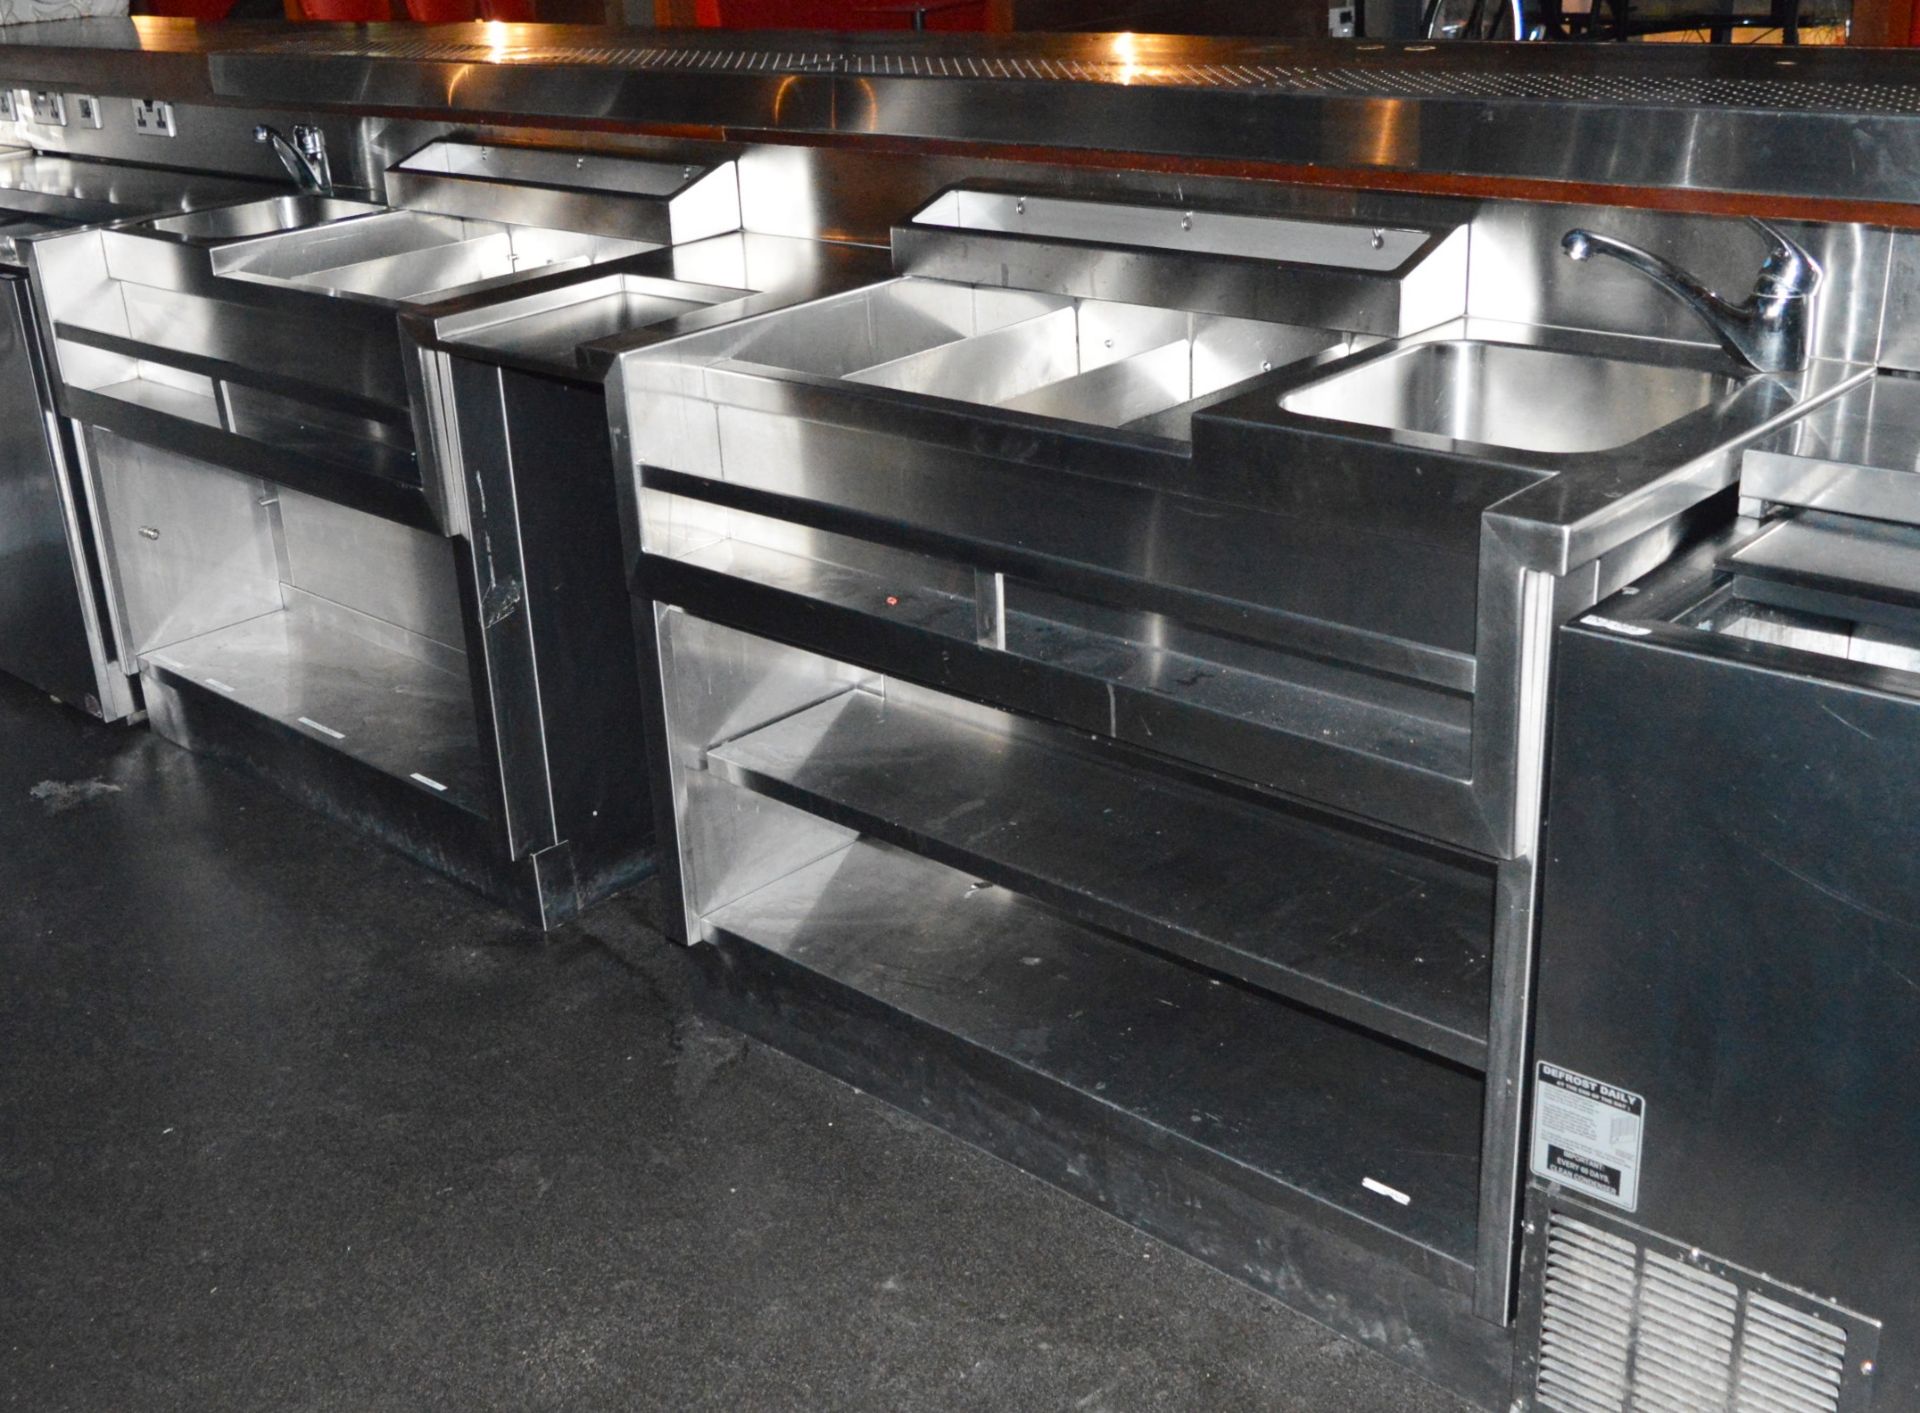 1 x Stainless Steel Double Speed Bar With Two Ice Wells and Two Sink Basins - More Info to